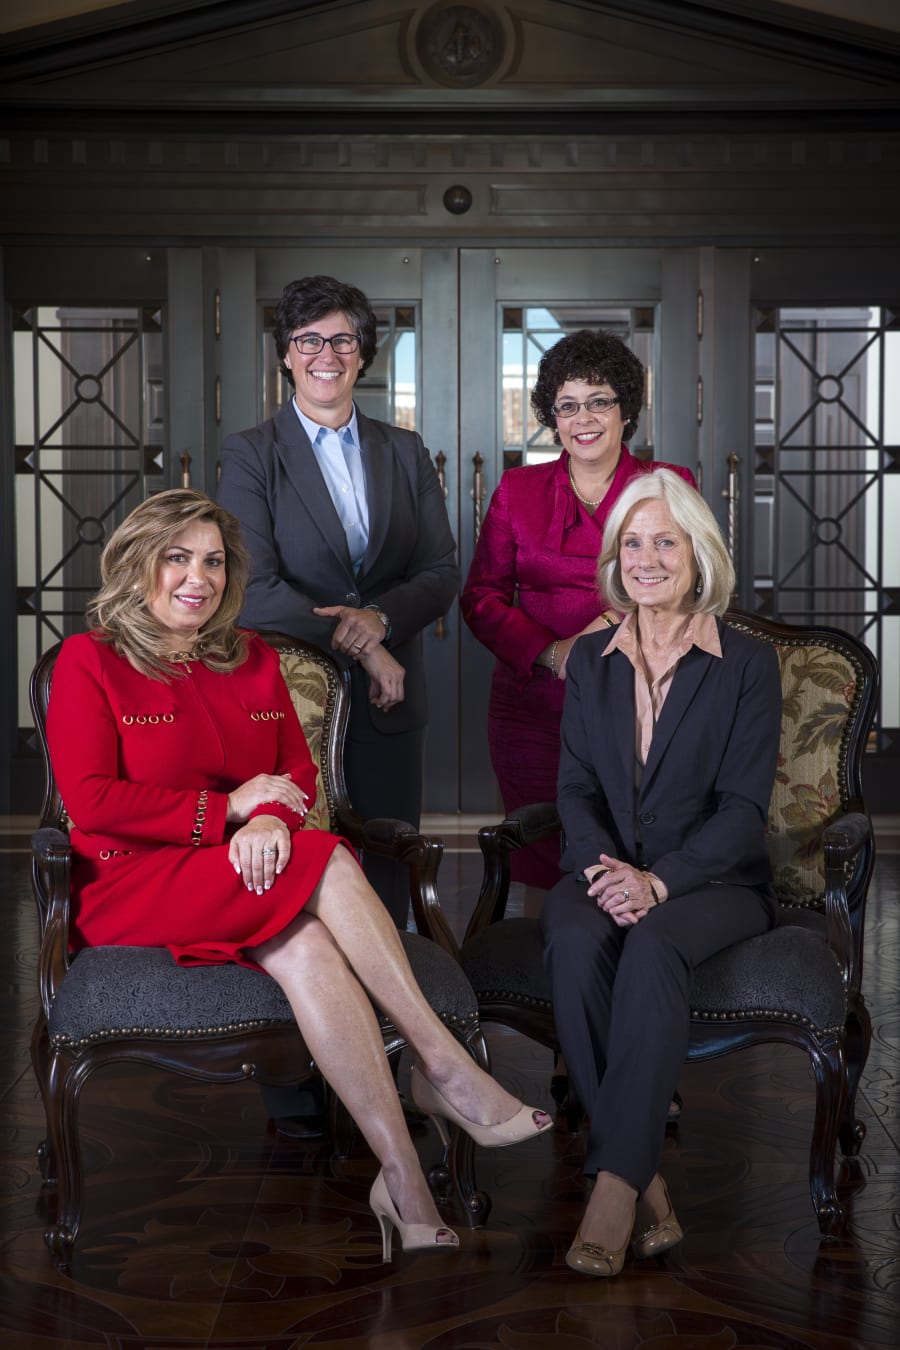 Justice Abbi Silver, from left, Justice Lidia Stiglich, Justice Elissa Cadish and Justice Kristina Pickering at the Supreme Court of Nevada in downtown Las Vegas on Jan. 9, 2019. (Richard Brian / Las Vegas Review-Journal) @vegasphotograph